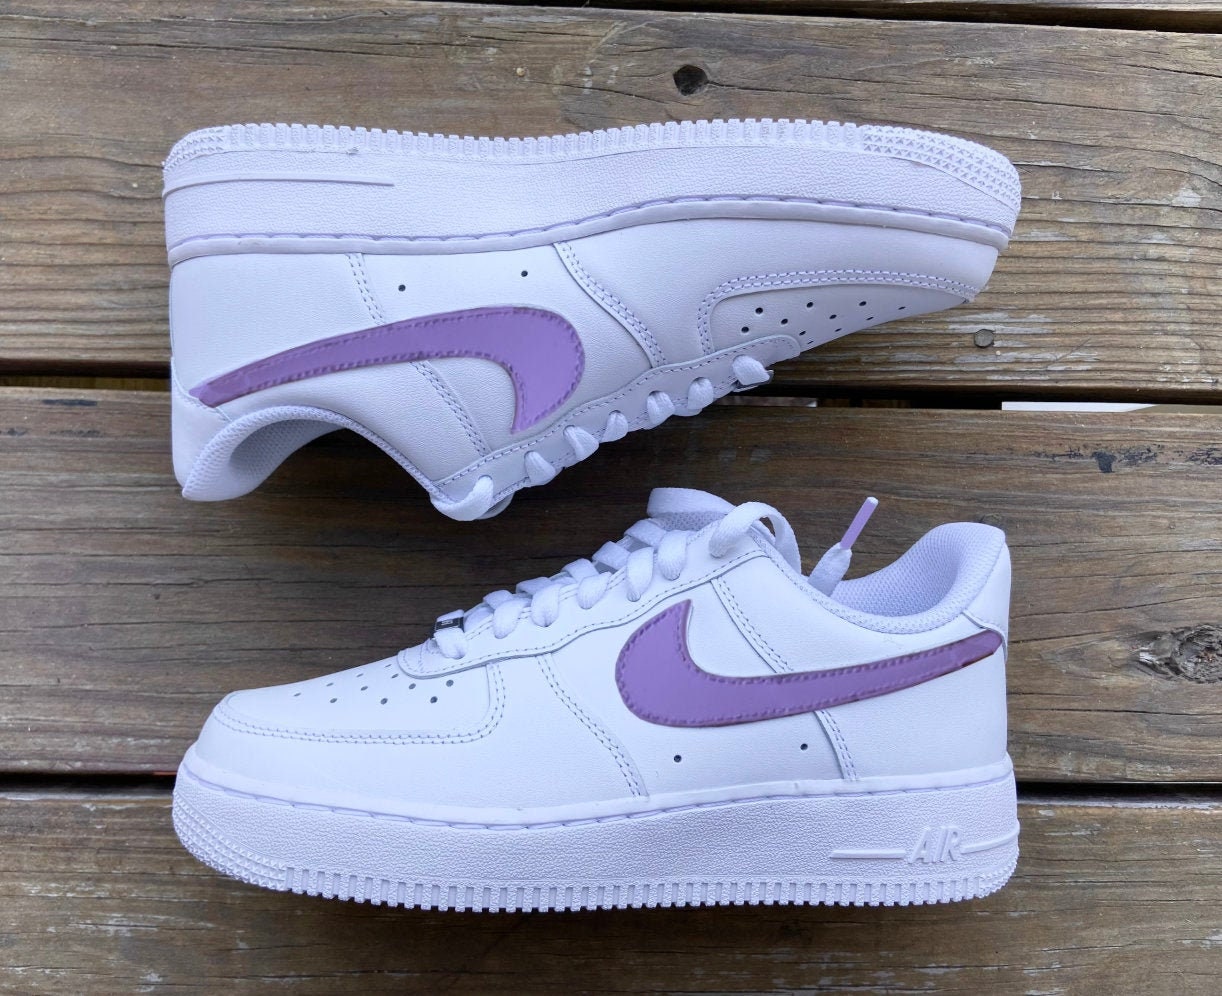 Nike Air Force 1 Lavender: Adding a Touch of Calm and Femininity to Your Sneaker Collection